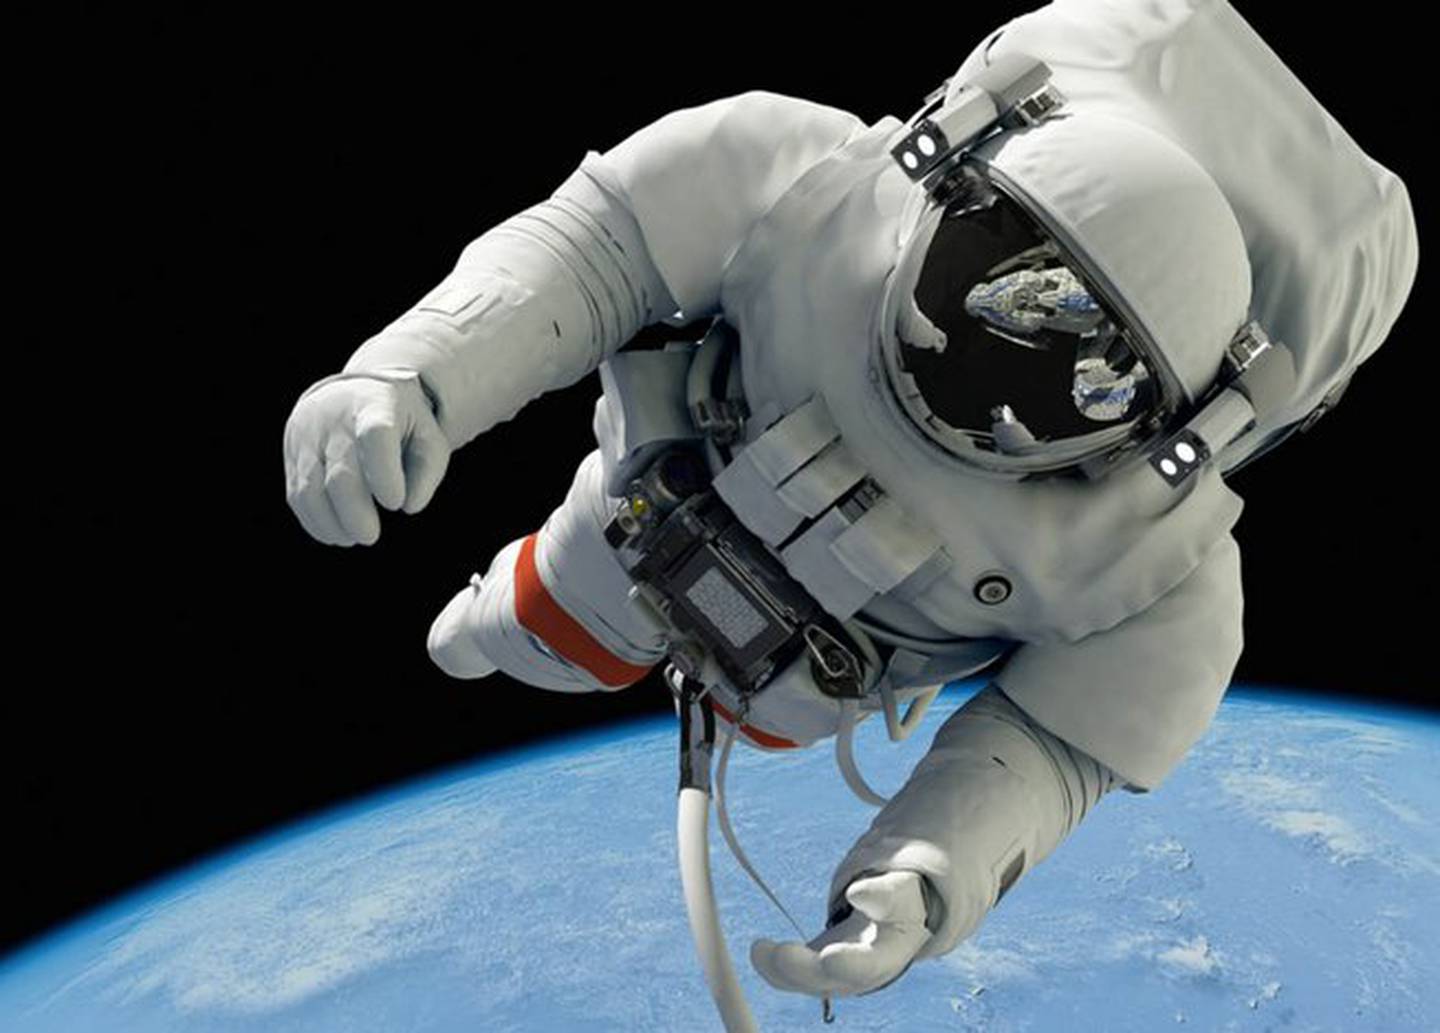 Somatic mutations can appear because astronauts work in an extreme environment.